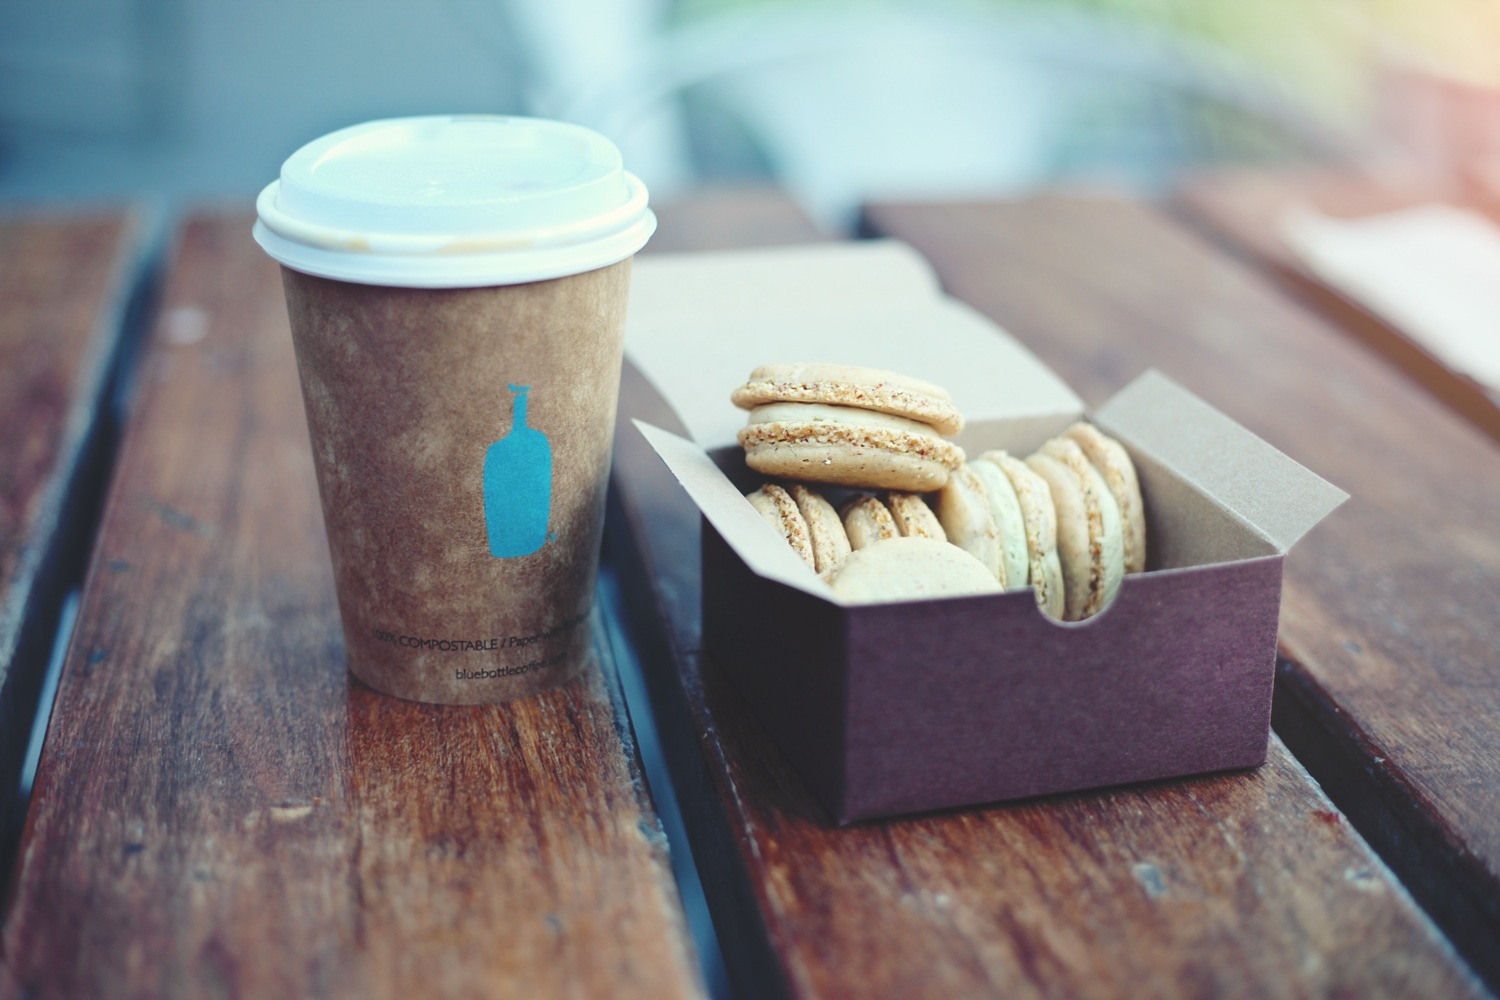 A take away coffee in a compostable cup with an open box of cookies on a wooden bench